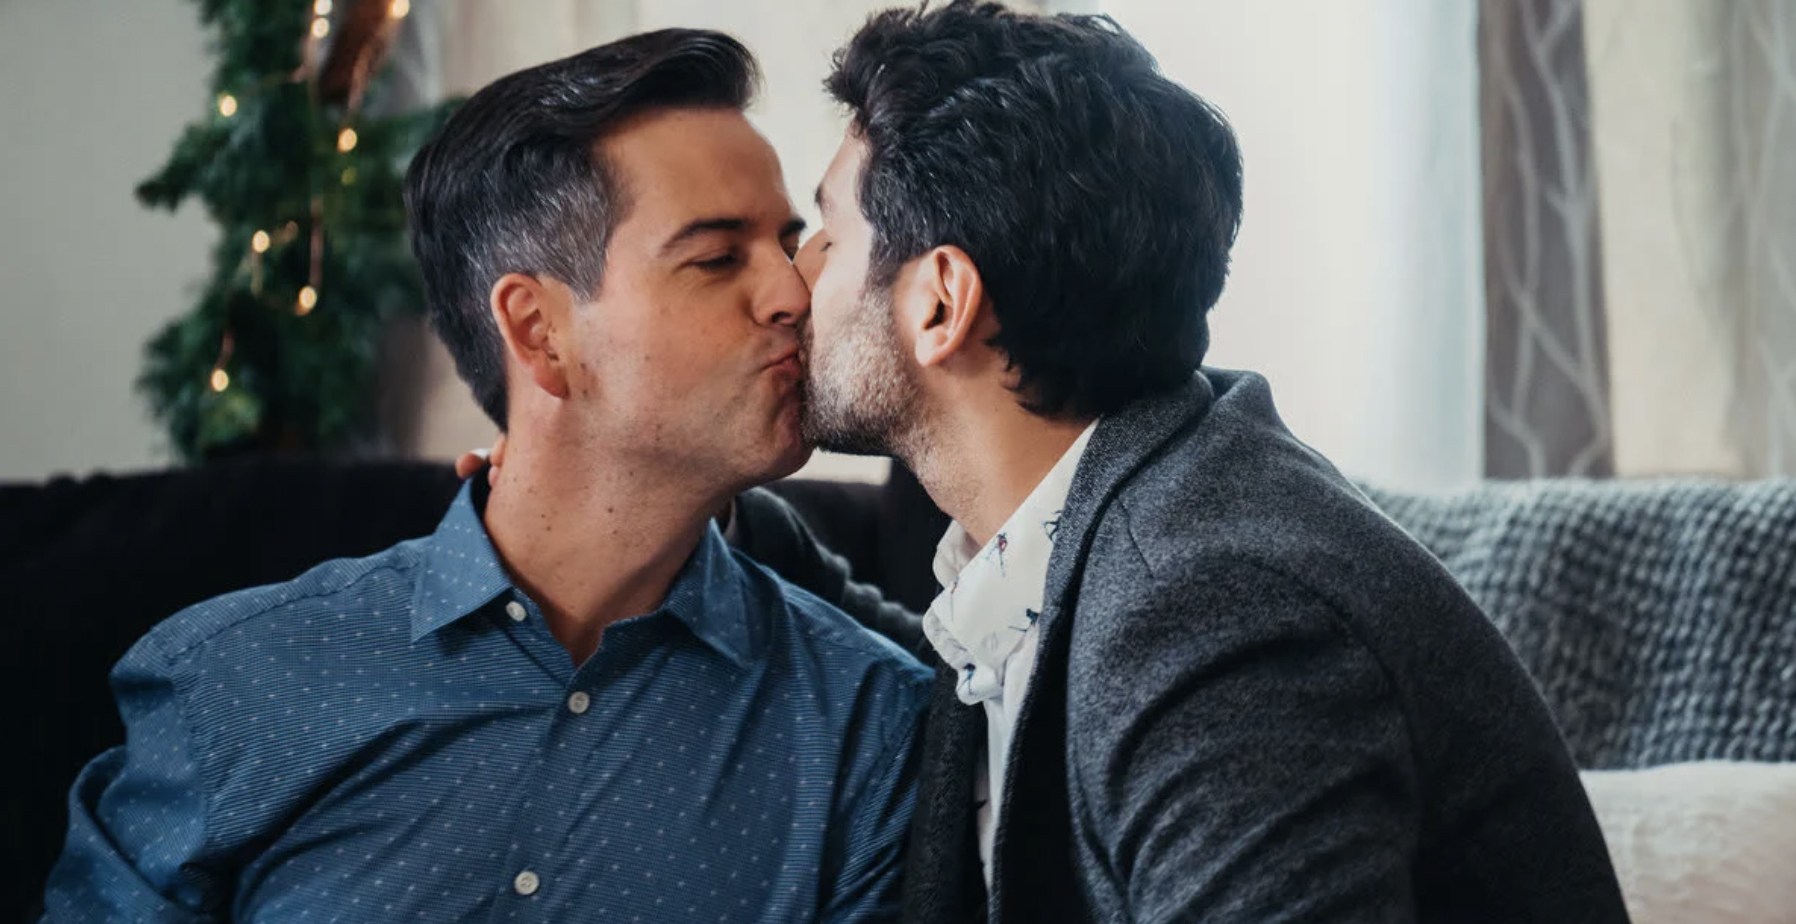 Lifetime announces 1st holiday movie centered around same-sex couple pic